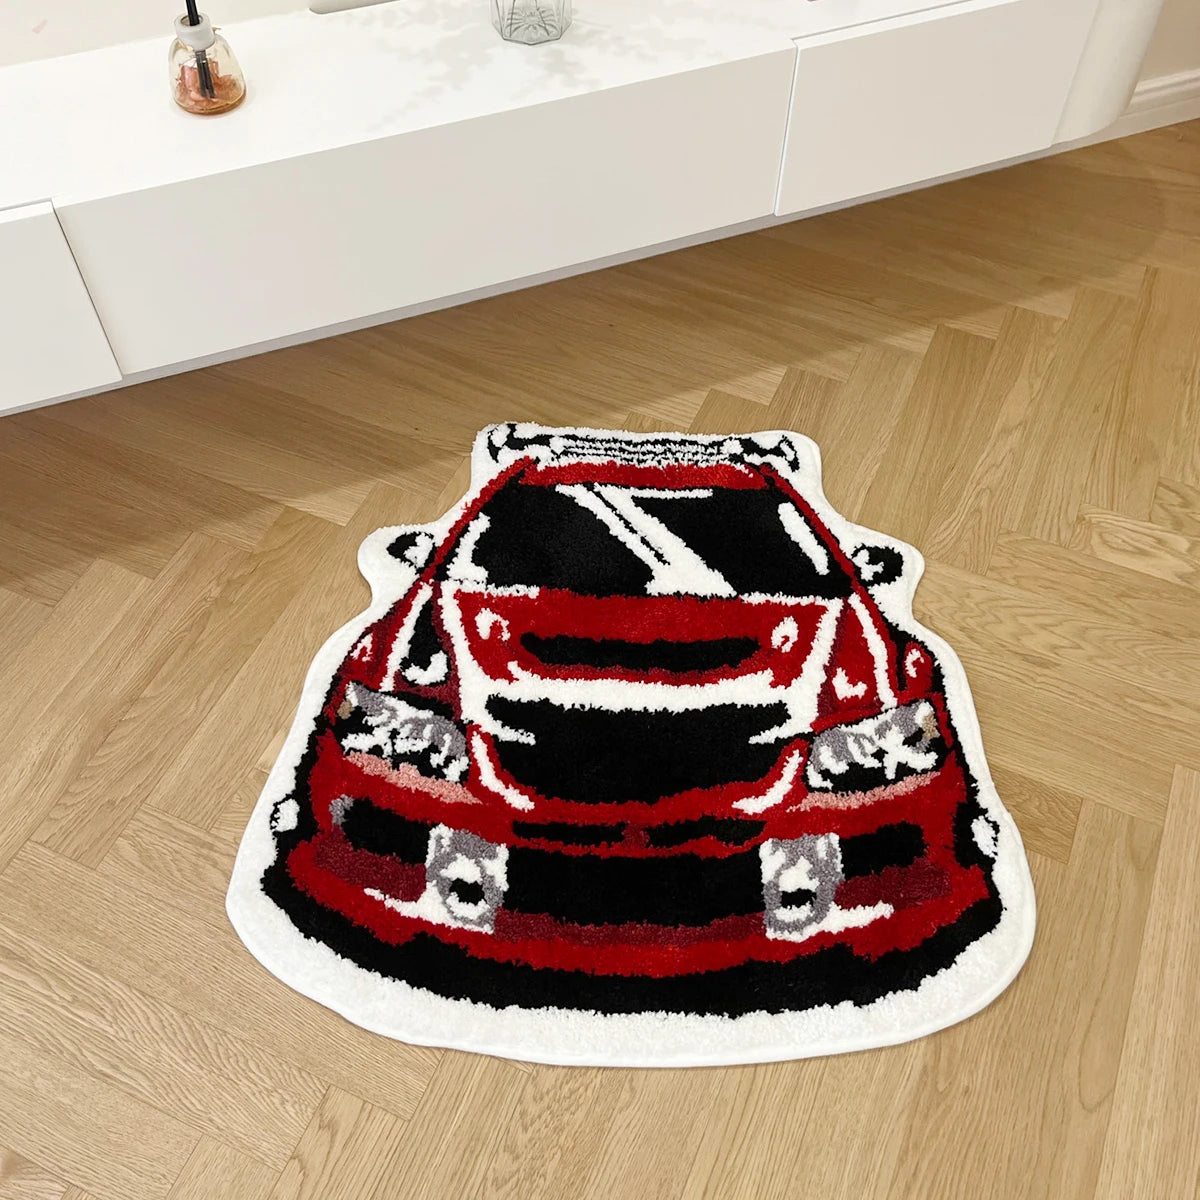 Red Racing Car Shaped Tufting Rug - Soft, Non-Slip Floor Mat